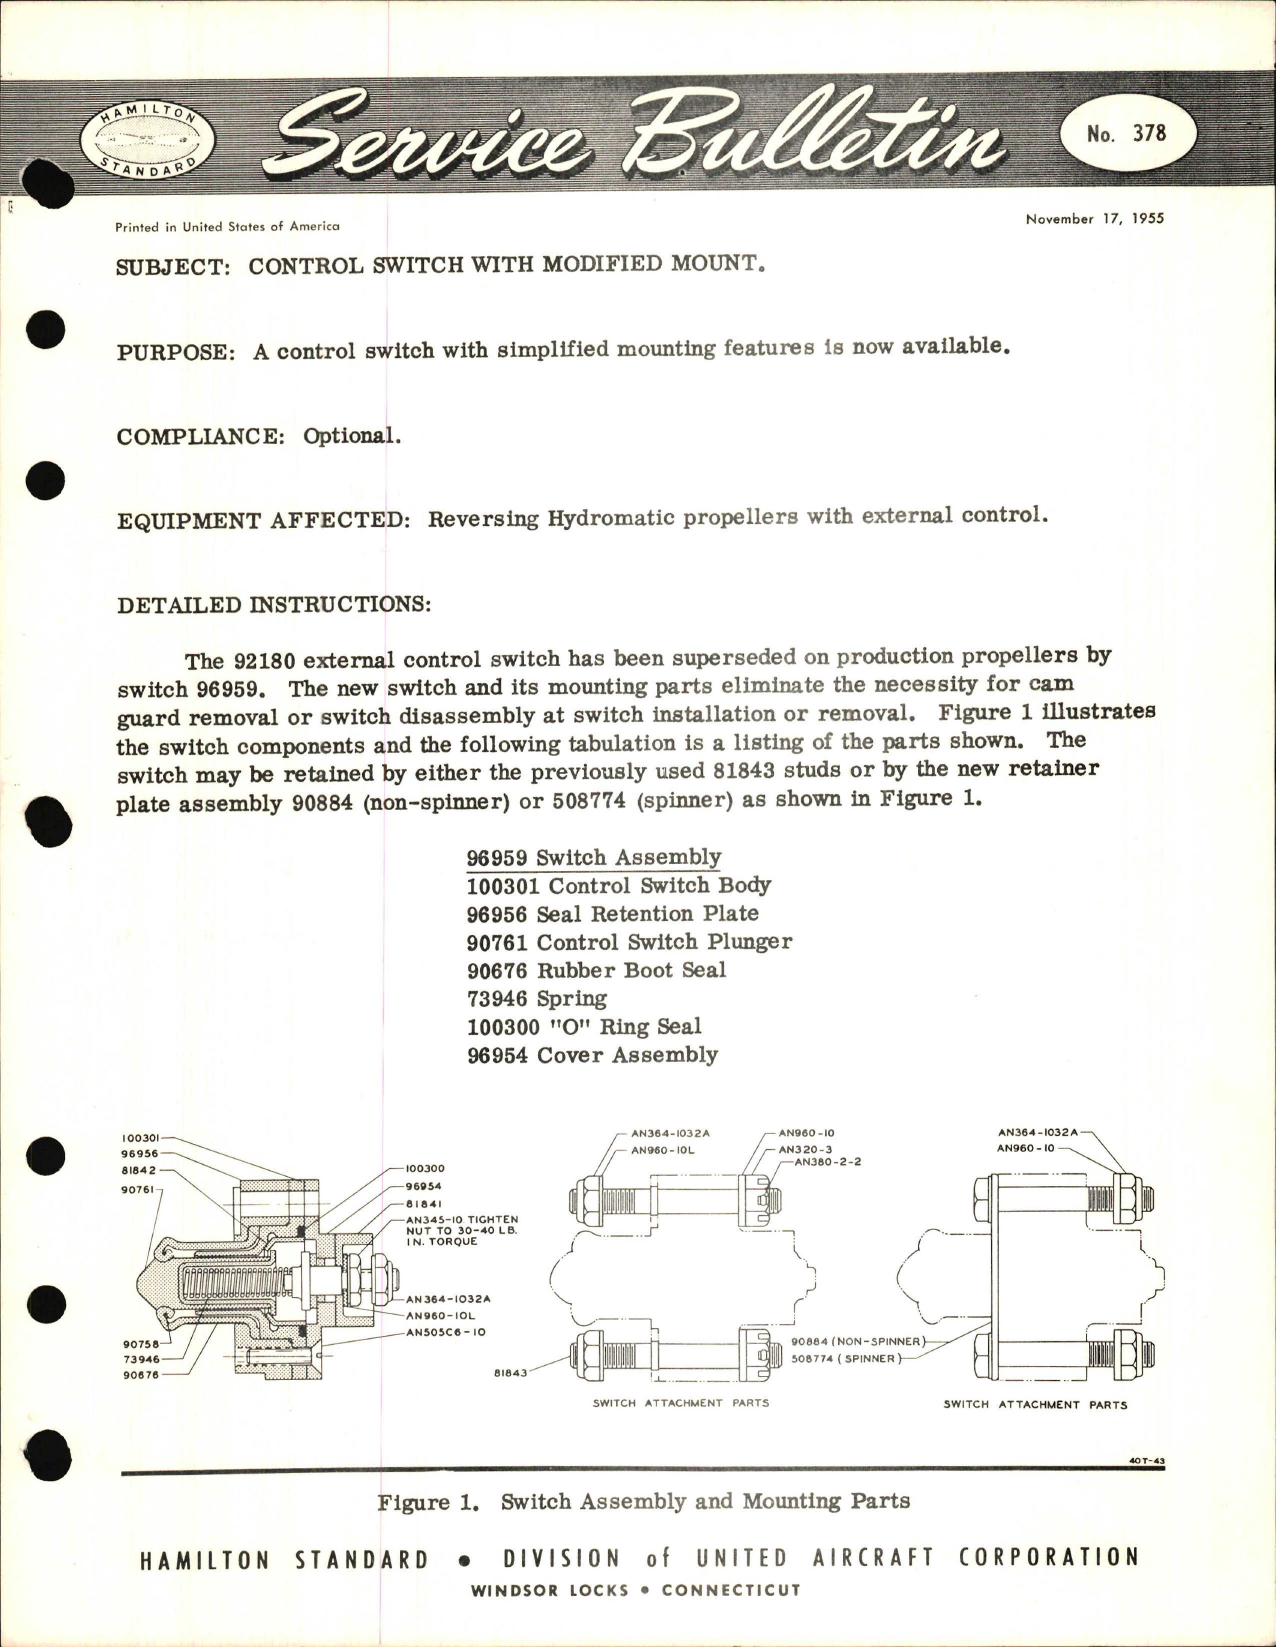 Sample page 1 from AirCorps Library document: Control Switch with Modified Mount